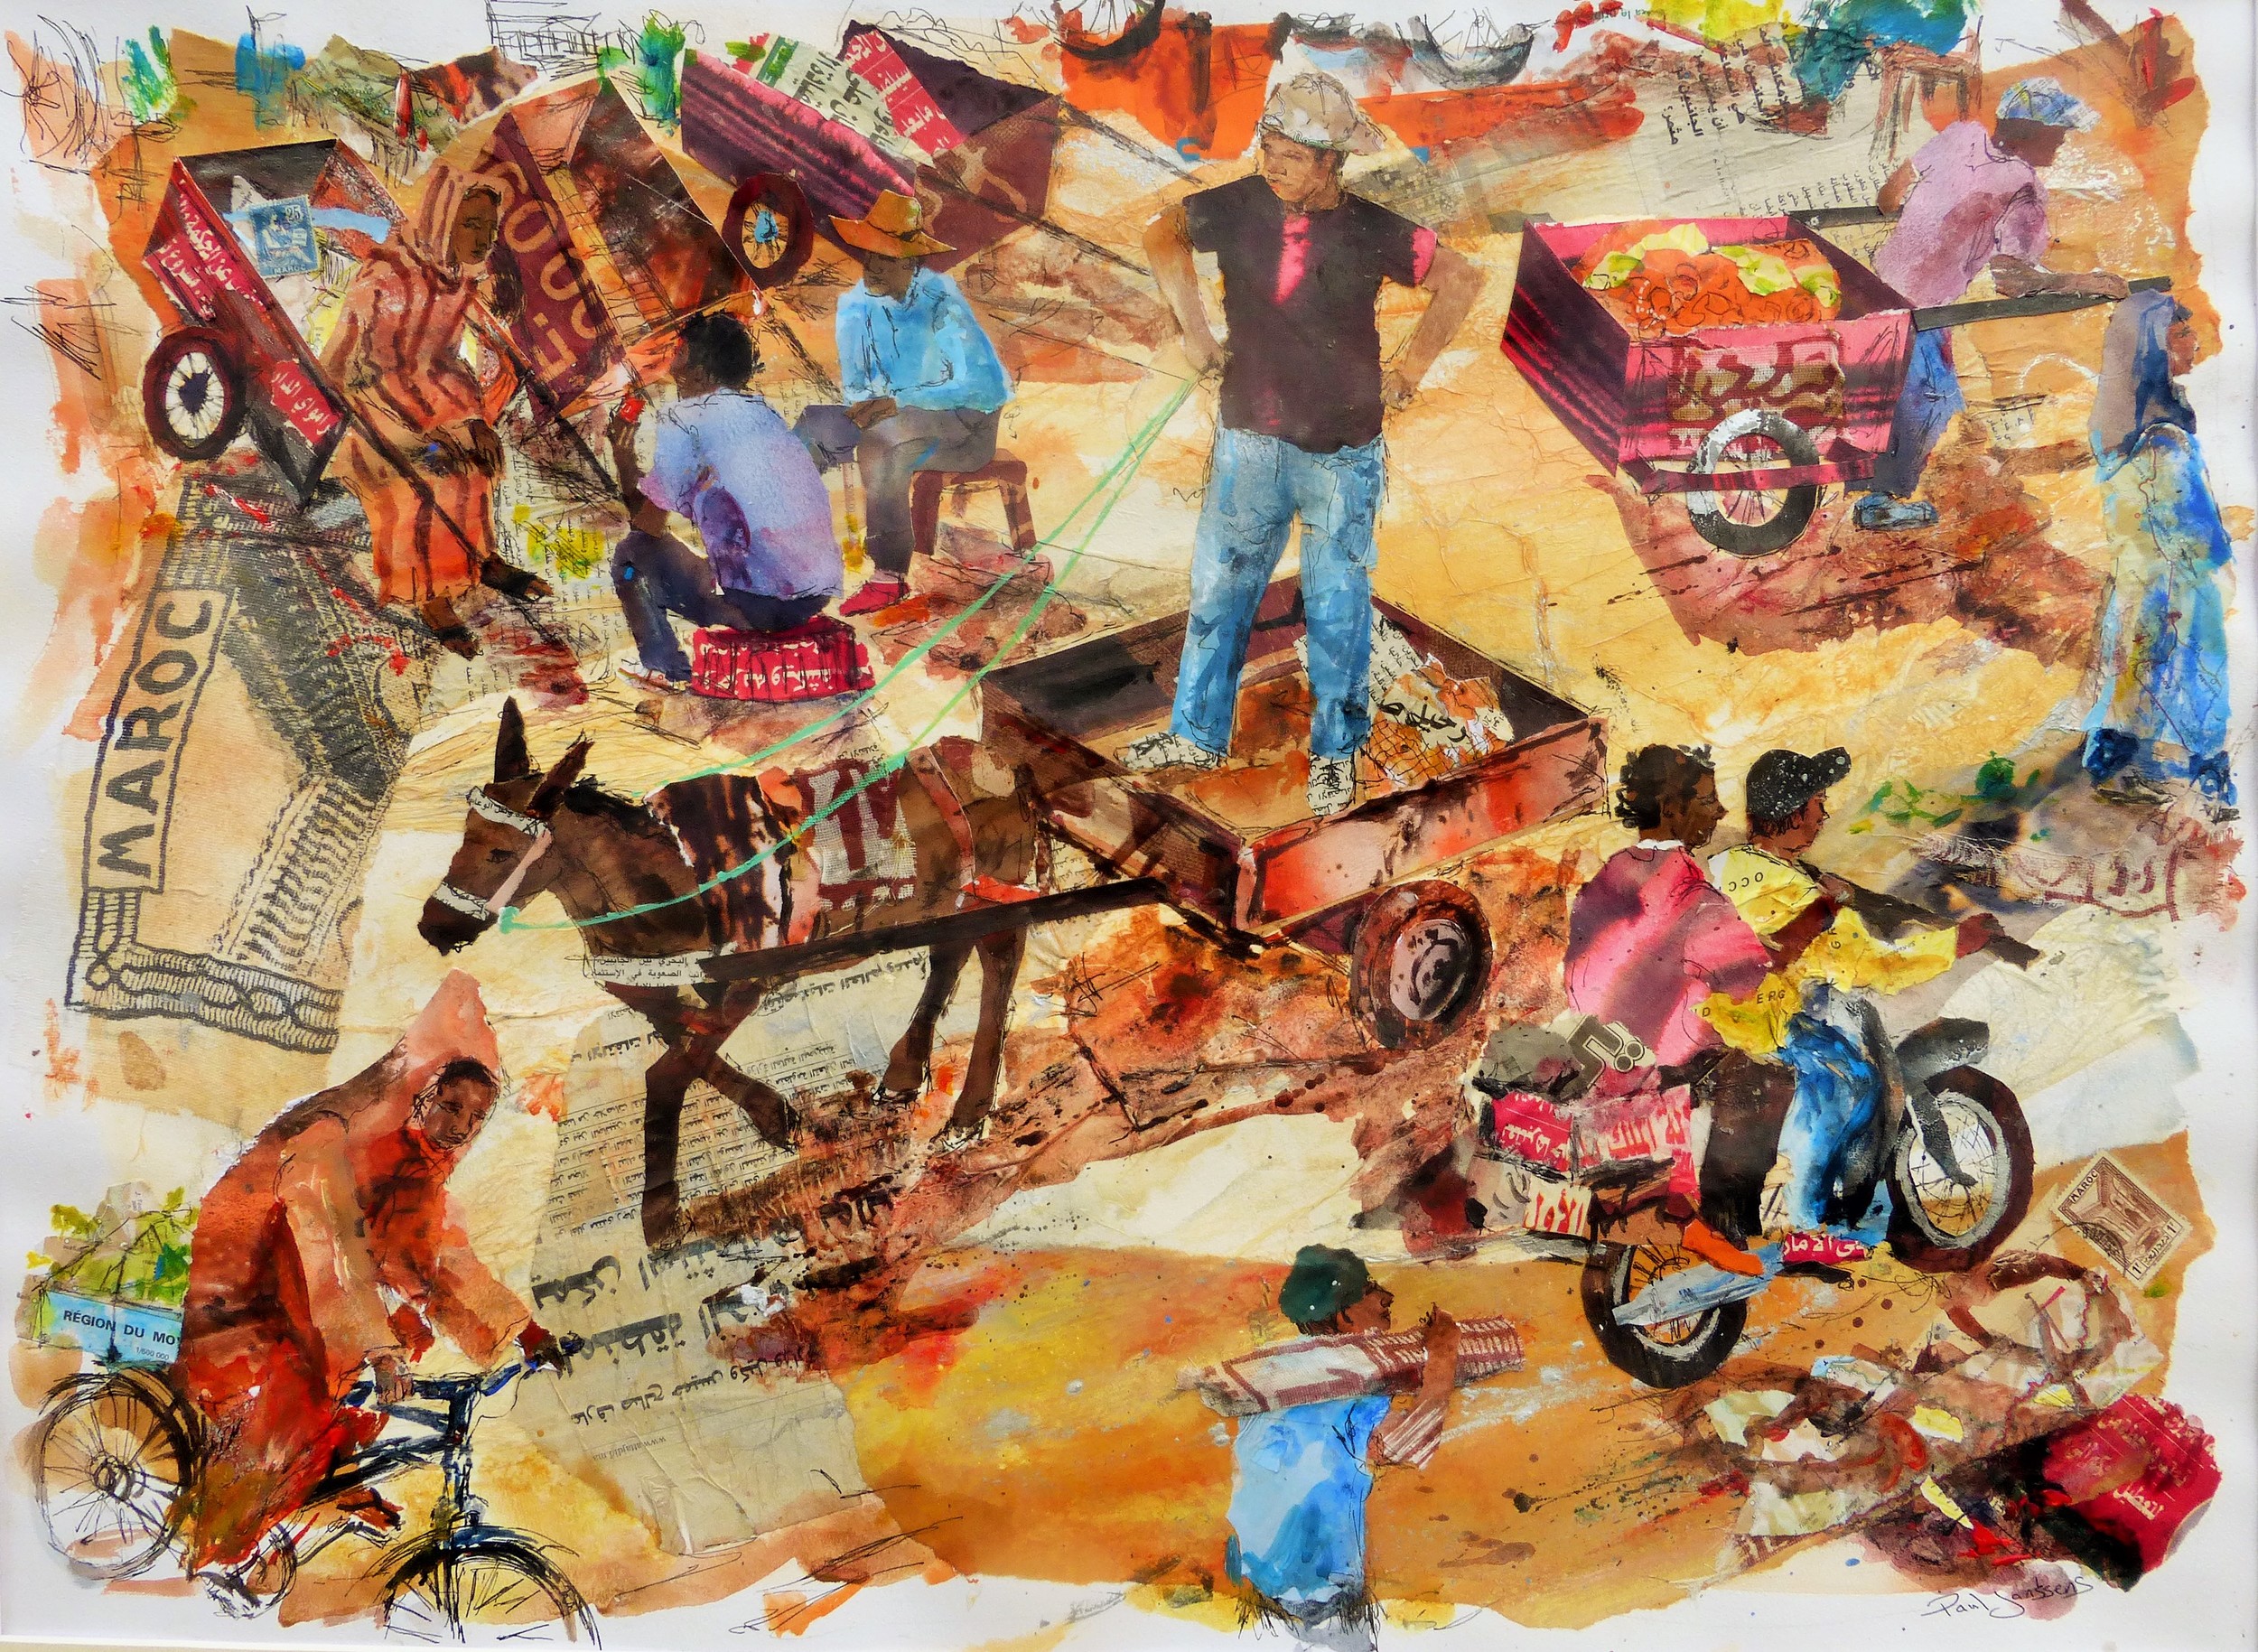 Place Jemaa el-Fna, Marrakech, Morocco. Acrylic, ink, collage and photo-silkscreen.